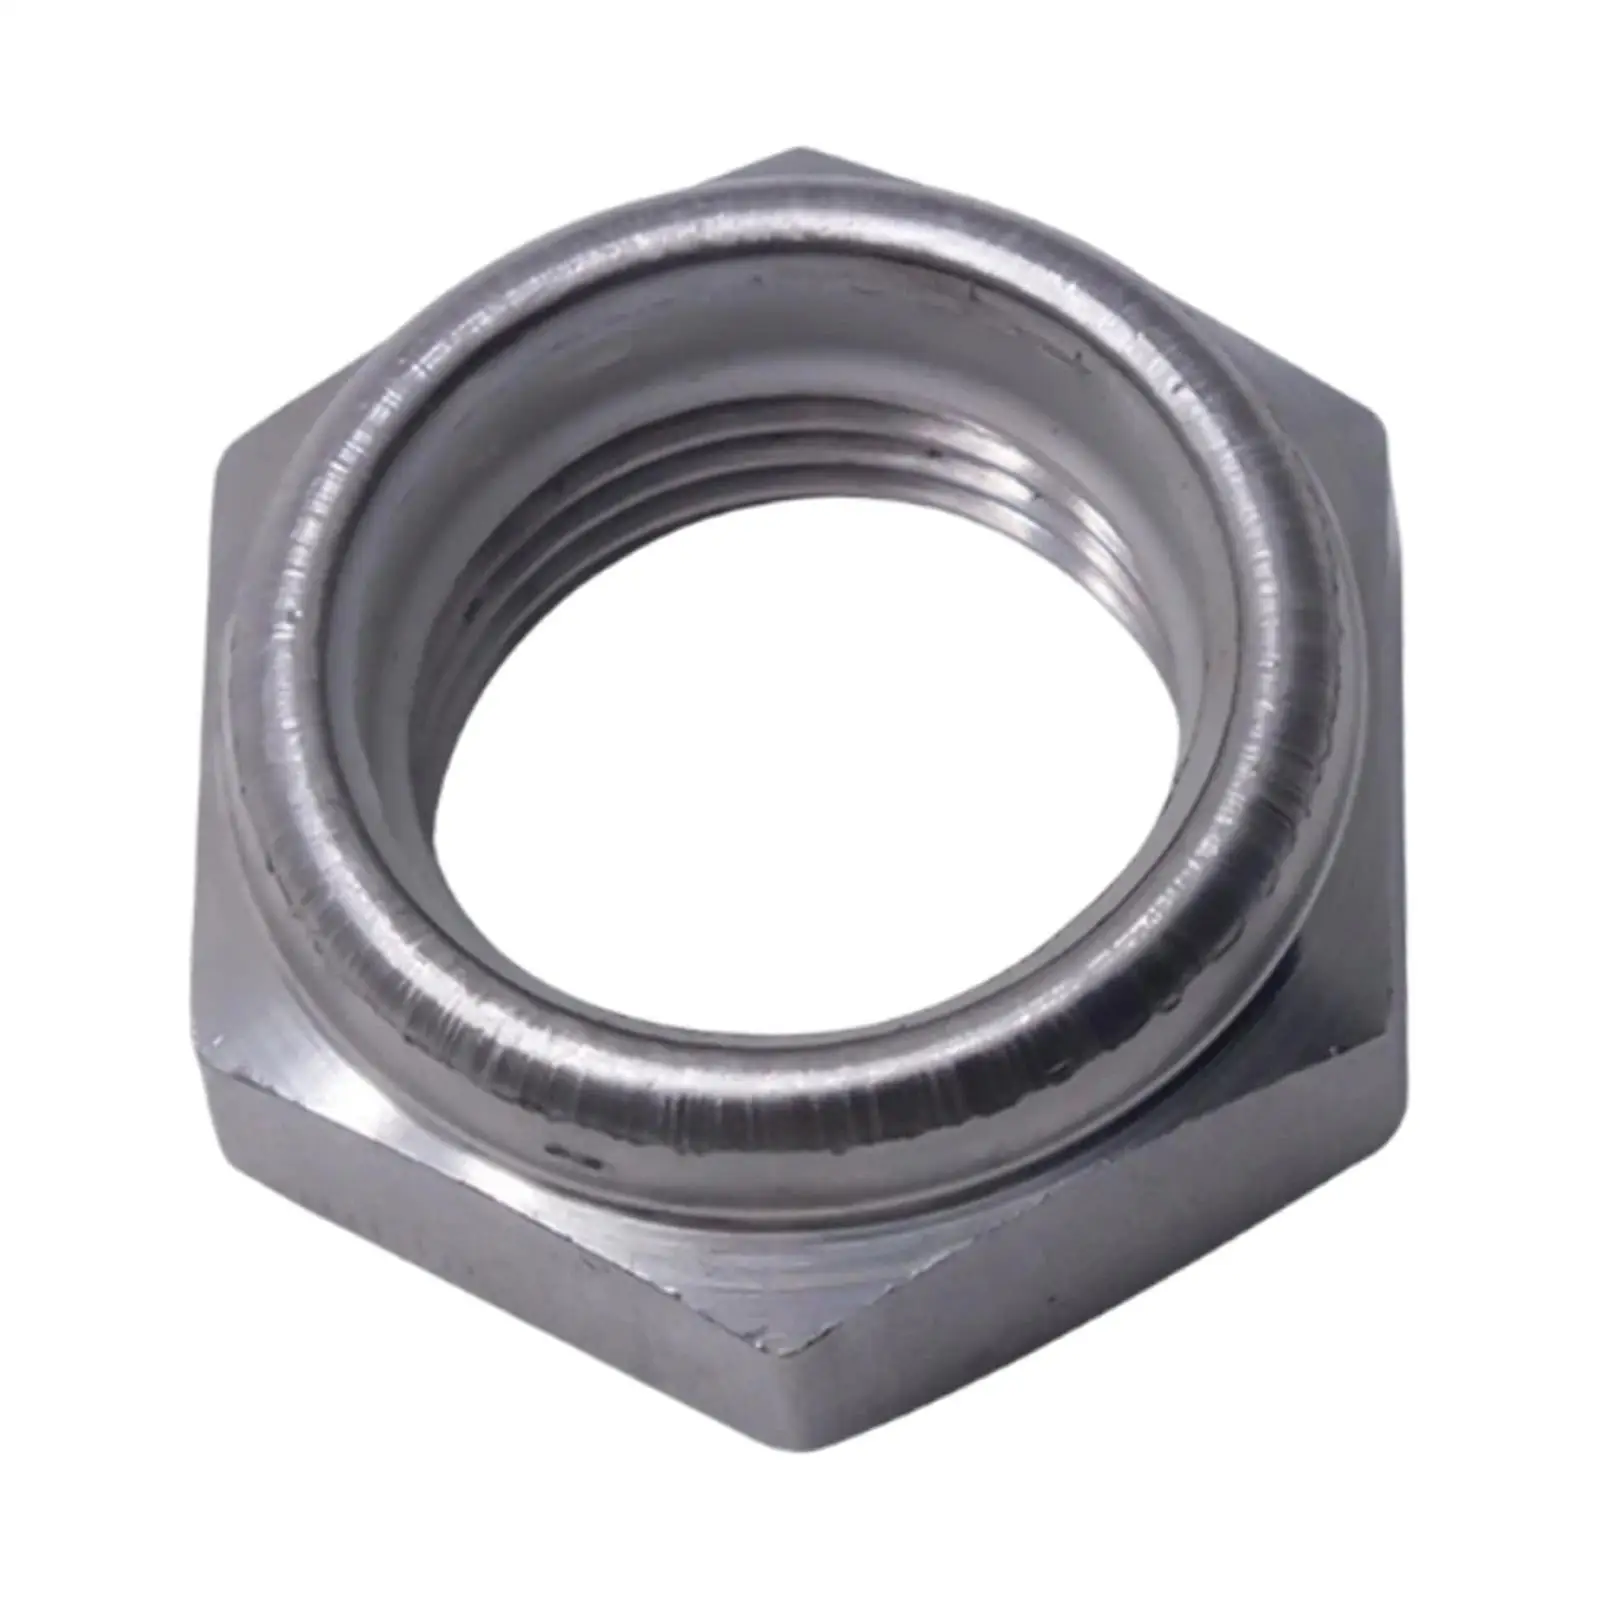 Replacement Self Locking Nut Sturdy 90185-22043-00 Stainless